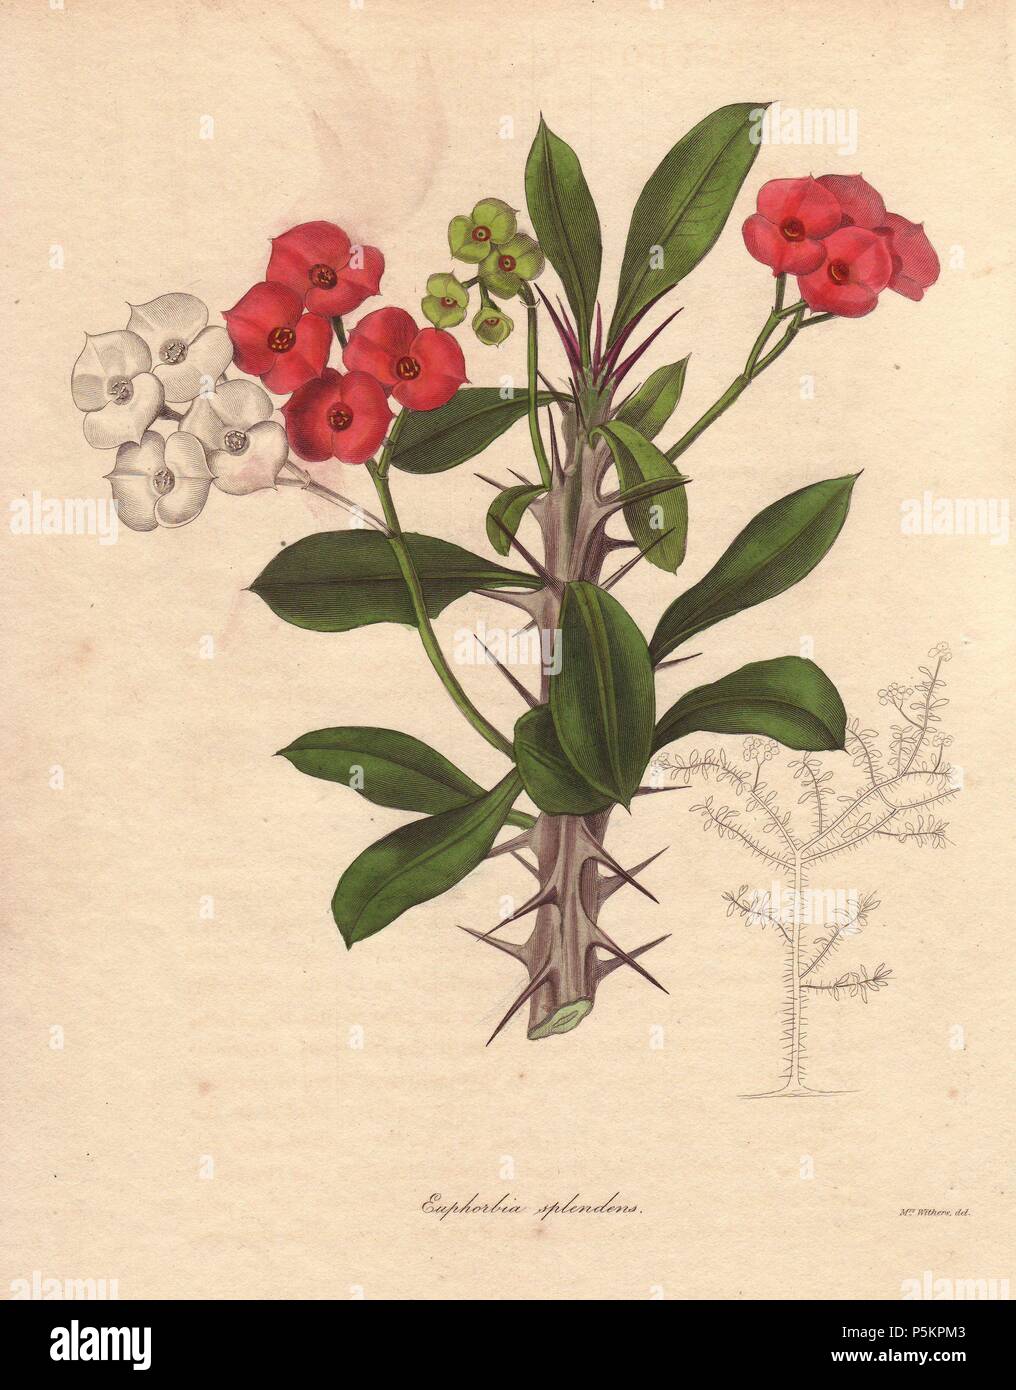 Euphorbia milii. . The crown of thorns (or christ plant) is a species of spurge native to Madagascar. It takes its name from the thorny stems and small crimson florets. . . Augusta Innes Withers (17931877): Augusta Baker, a clergyman's daughter, lived and worked in London all her life. She married an accountant, Theodore Withers, 20 years her senior, and gave lessons in flower painting. She became Flower Painter in Ordinary to Queen Adelaide. During the 1830s and 40s, she drew for books and magazines such as Lindley's Pomological Magazine, Curtis's Botanical Magazine, and Transactions of the  Stock Photo